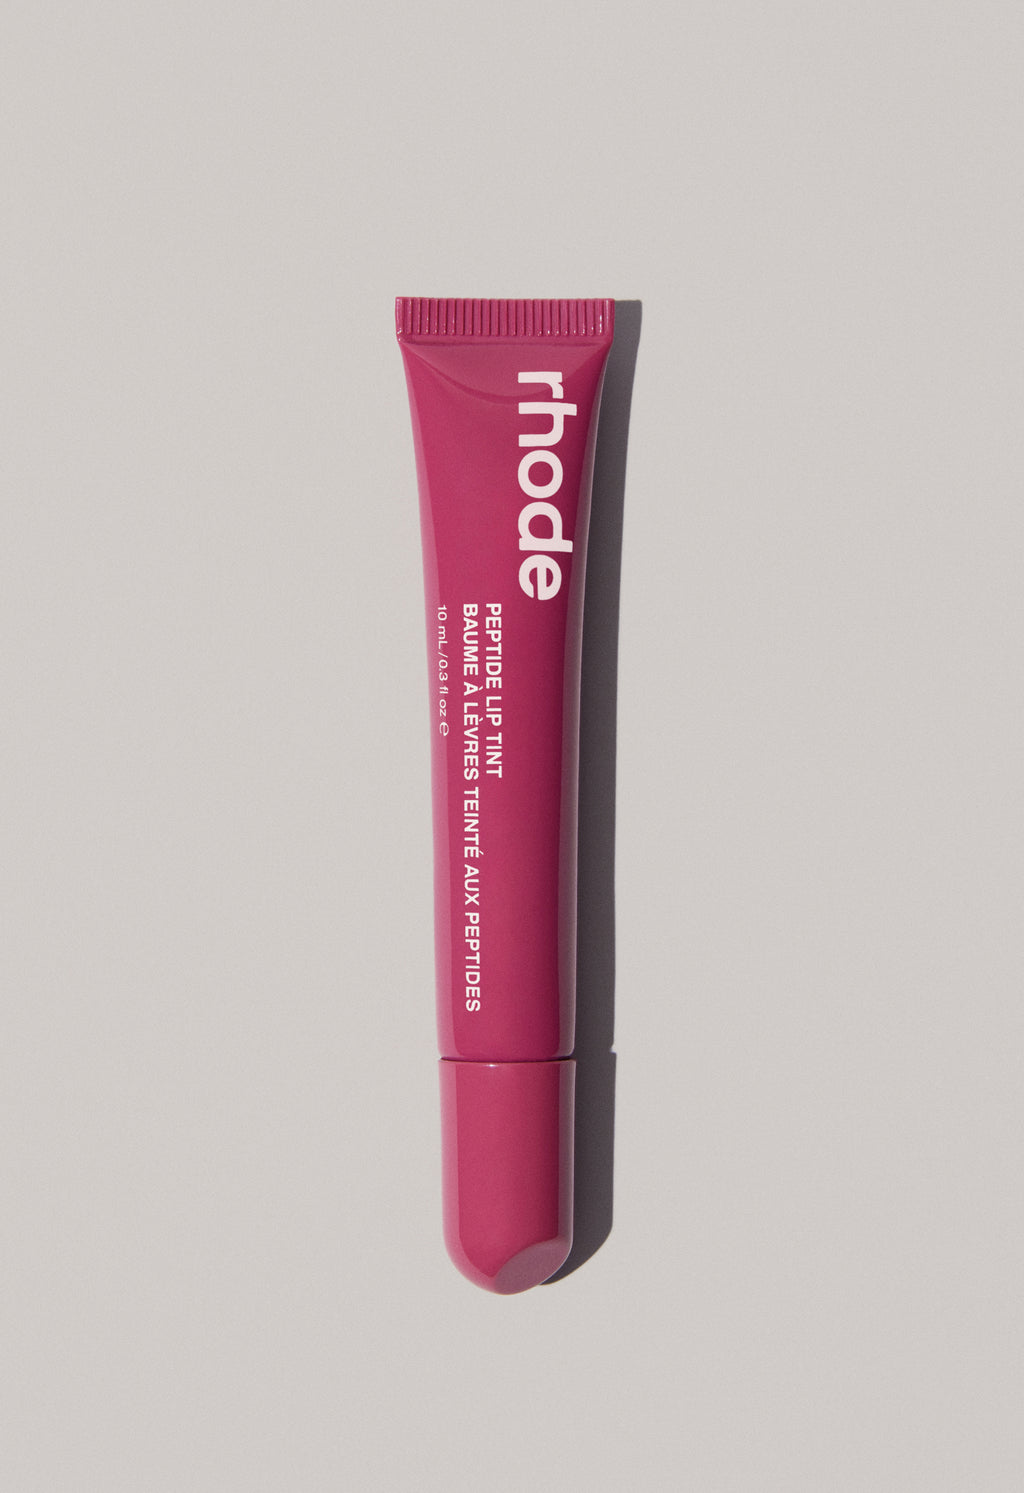 Rhode peptide lip tint lip tint Volare Makeup Raspberry Jelly - Crushed Berry  